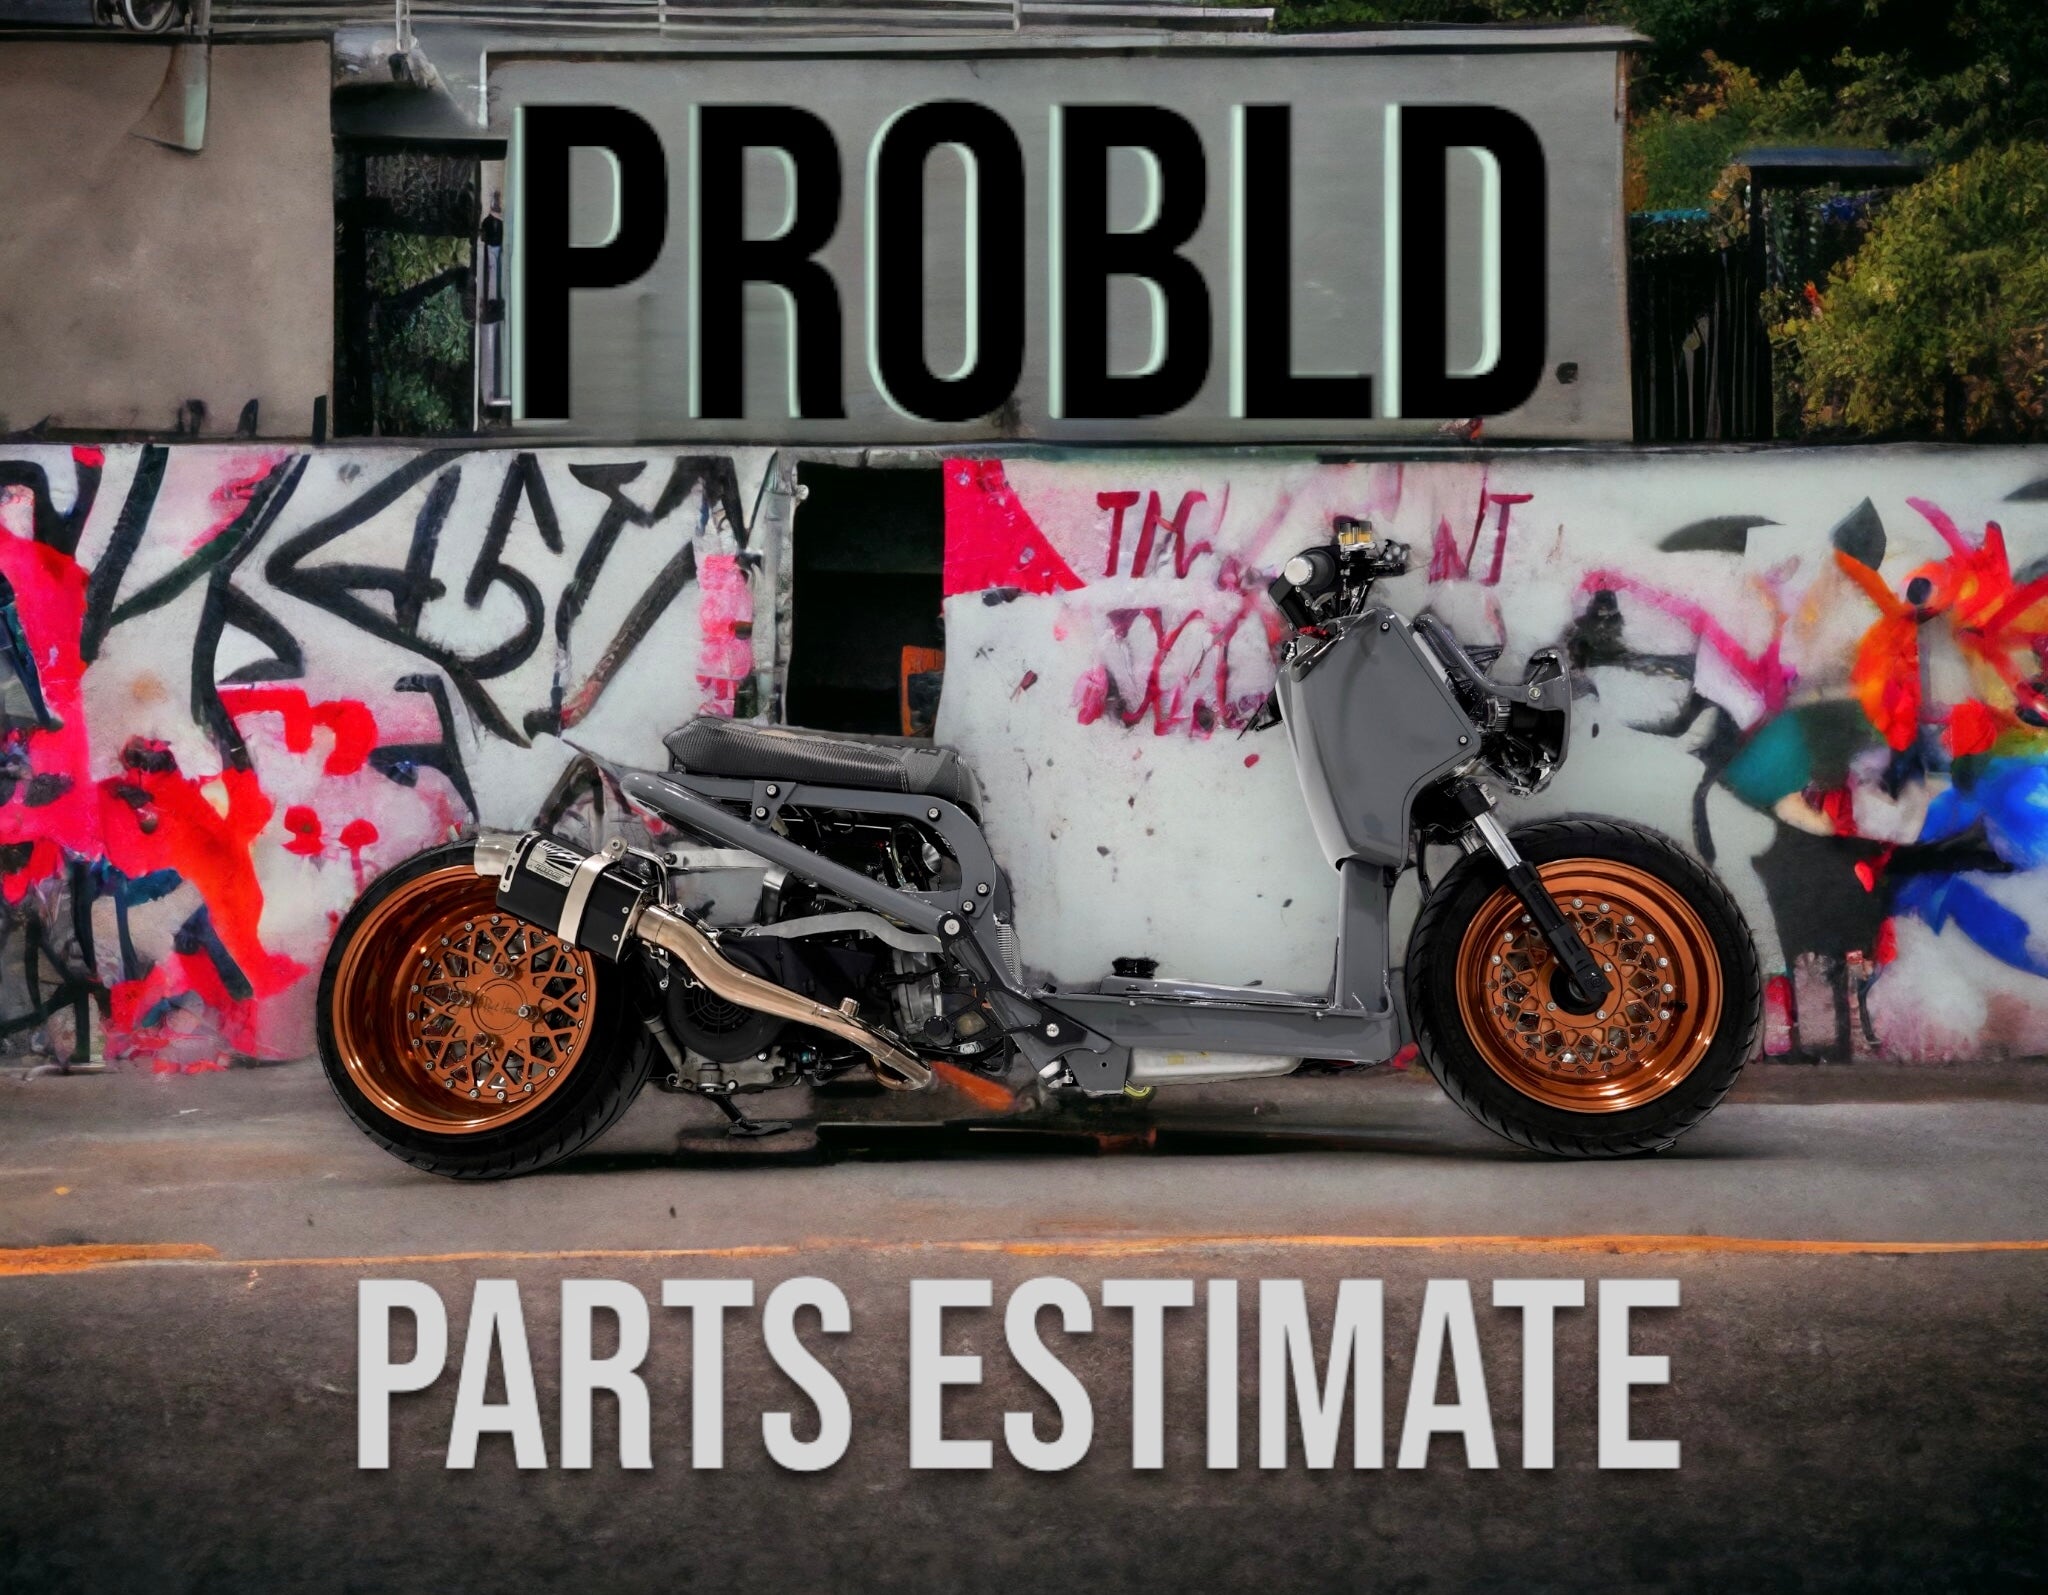 Have us create a custom part estimate for you!